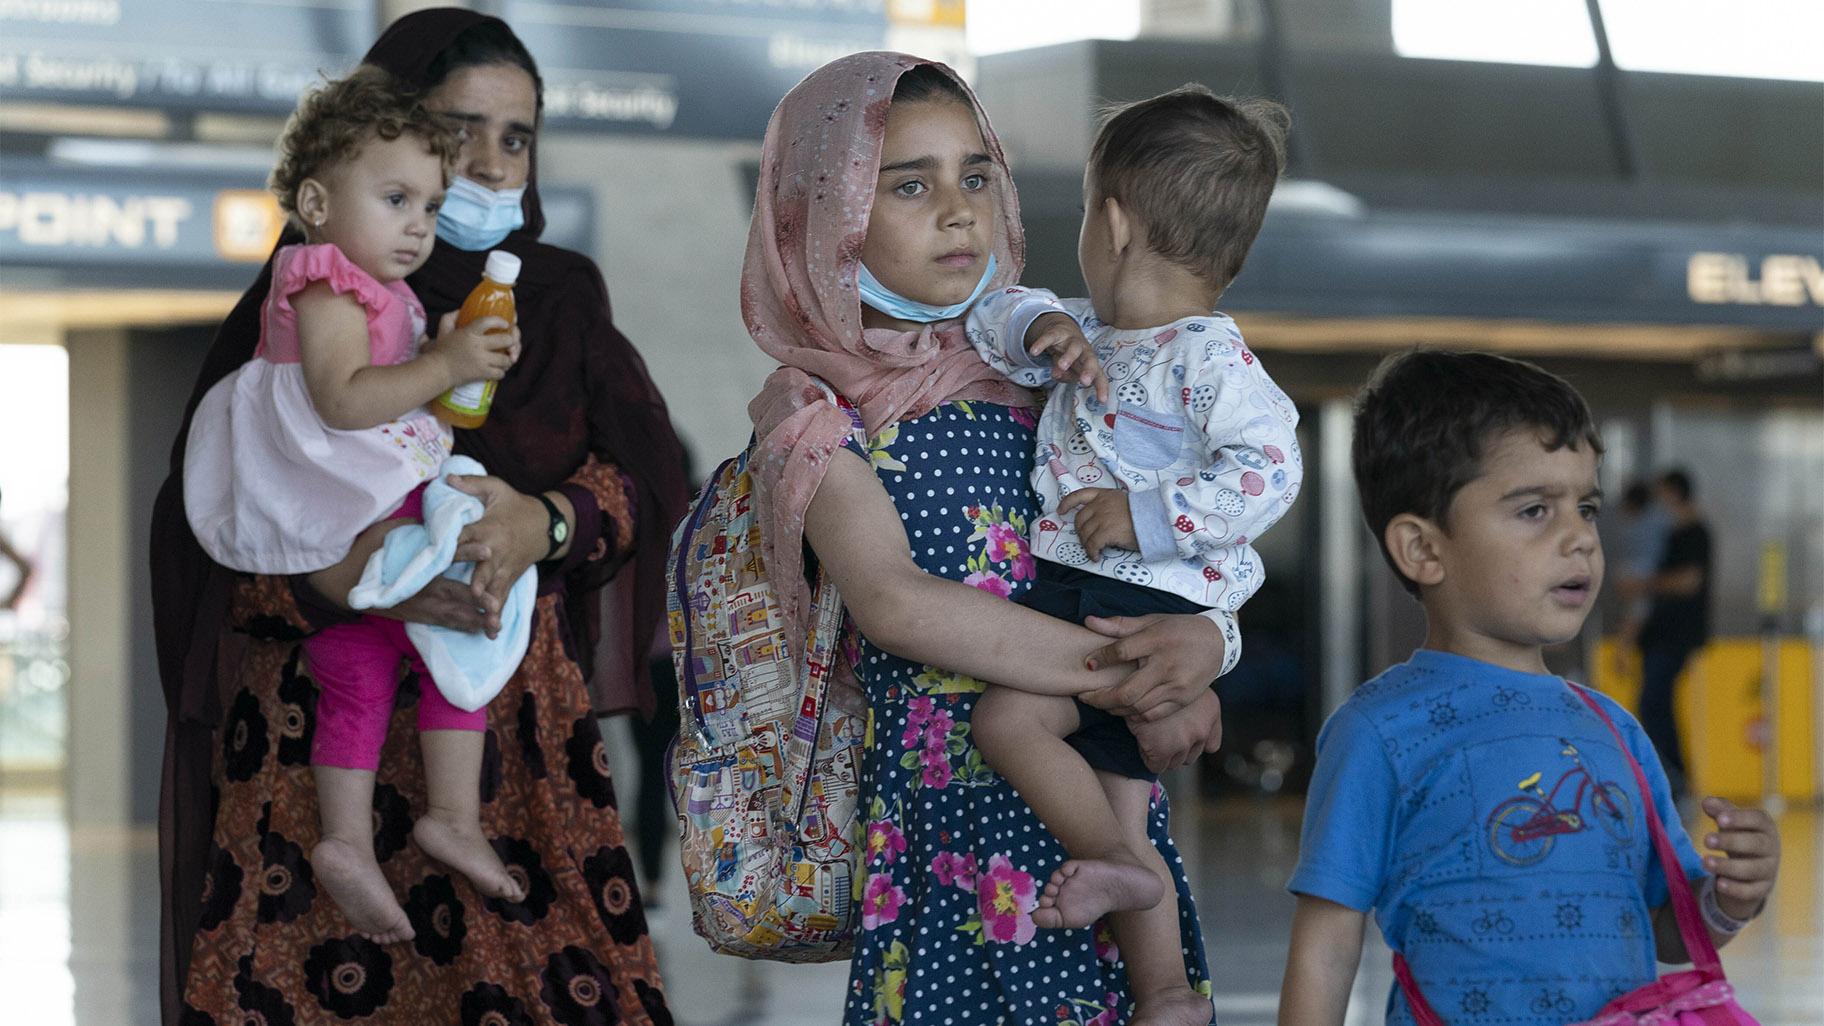 Families evacuated from Kabul, Afghanistan, walk through the terminal before boarding a bus after they arrived at Washington Dulles International Airport, in Chantilly, Va., on Thursday, Sept. 2, 2021. (AP Photo / Jose Luis Magana)